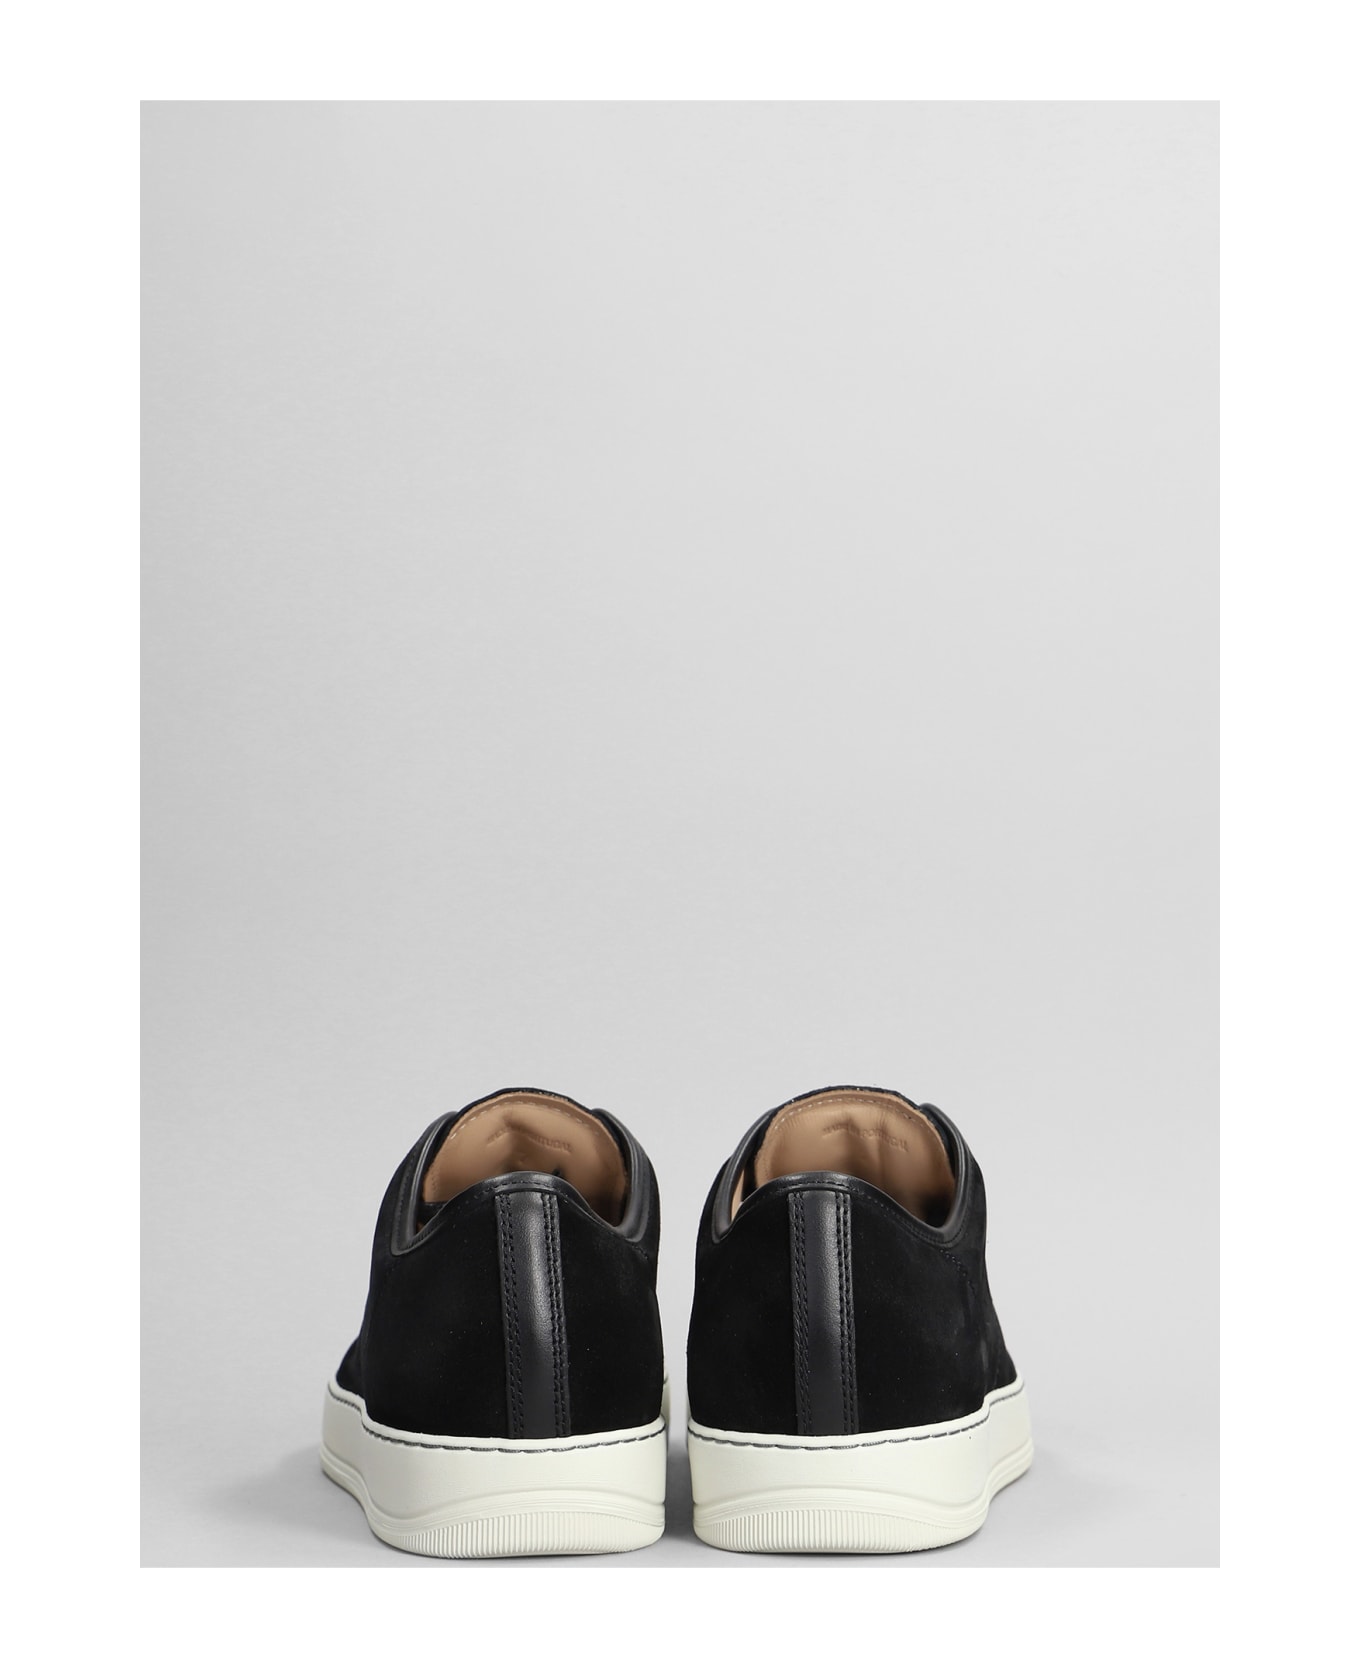 Lanvin Dbb1 Sneakers In Black Suede And Leather - black